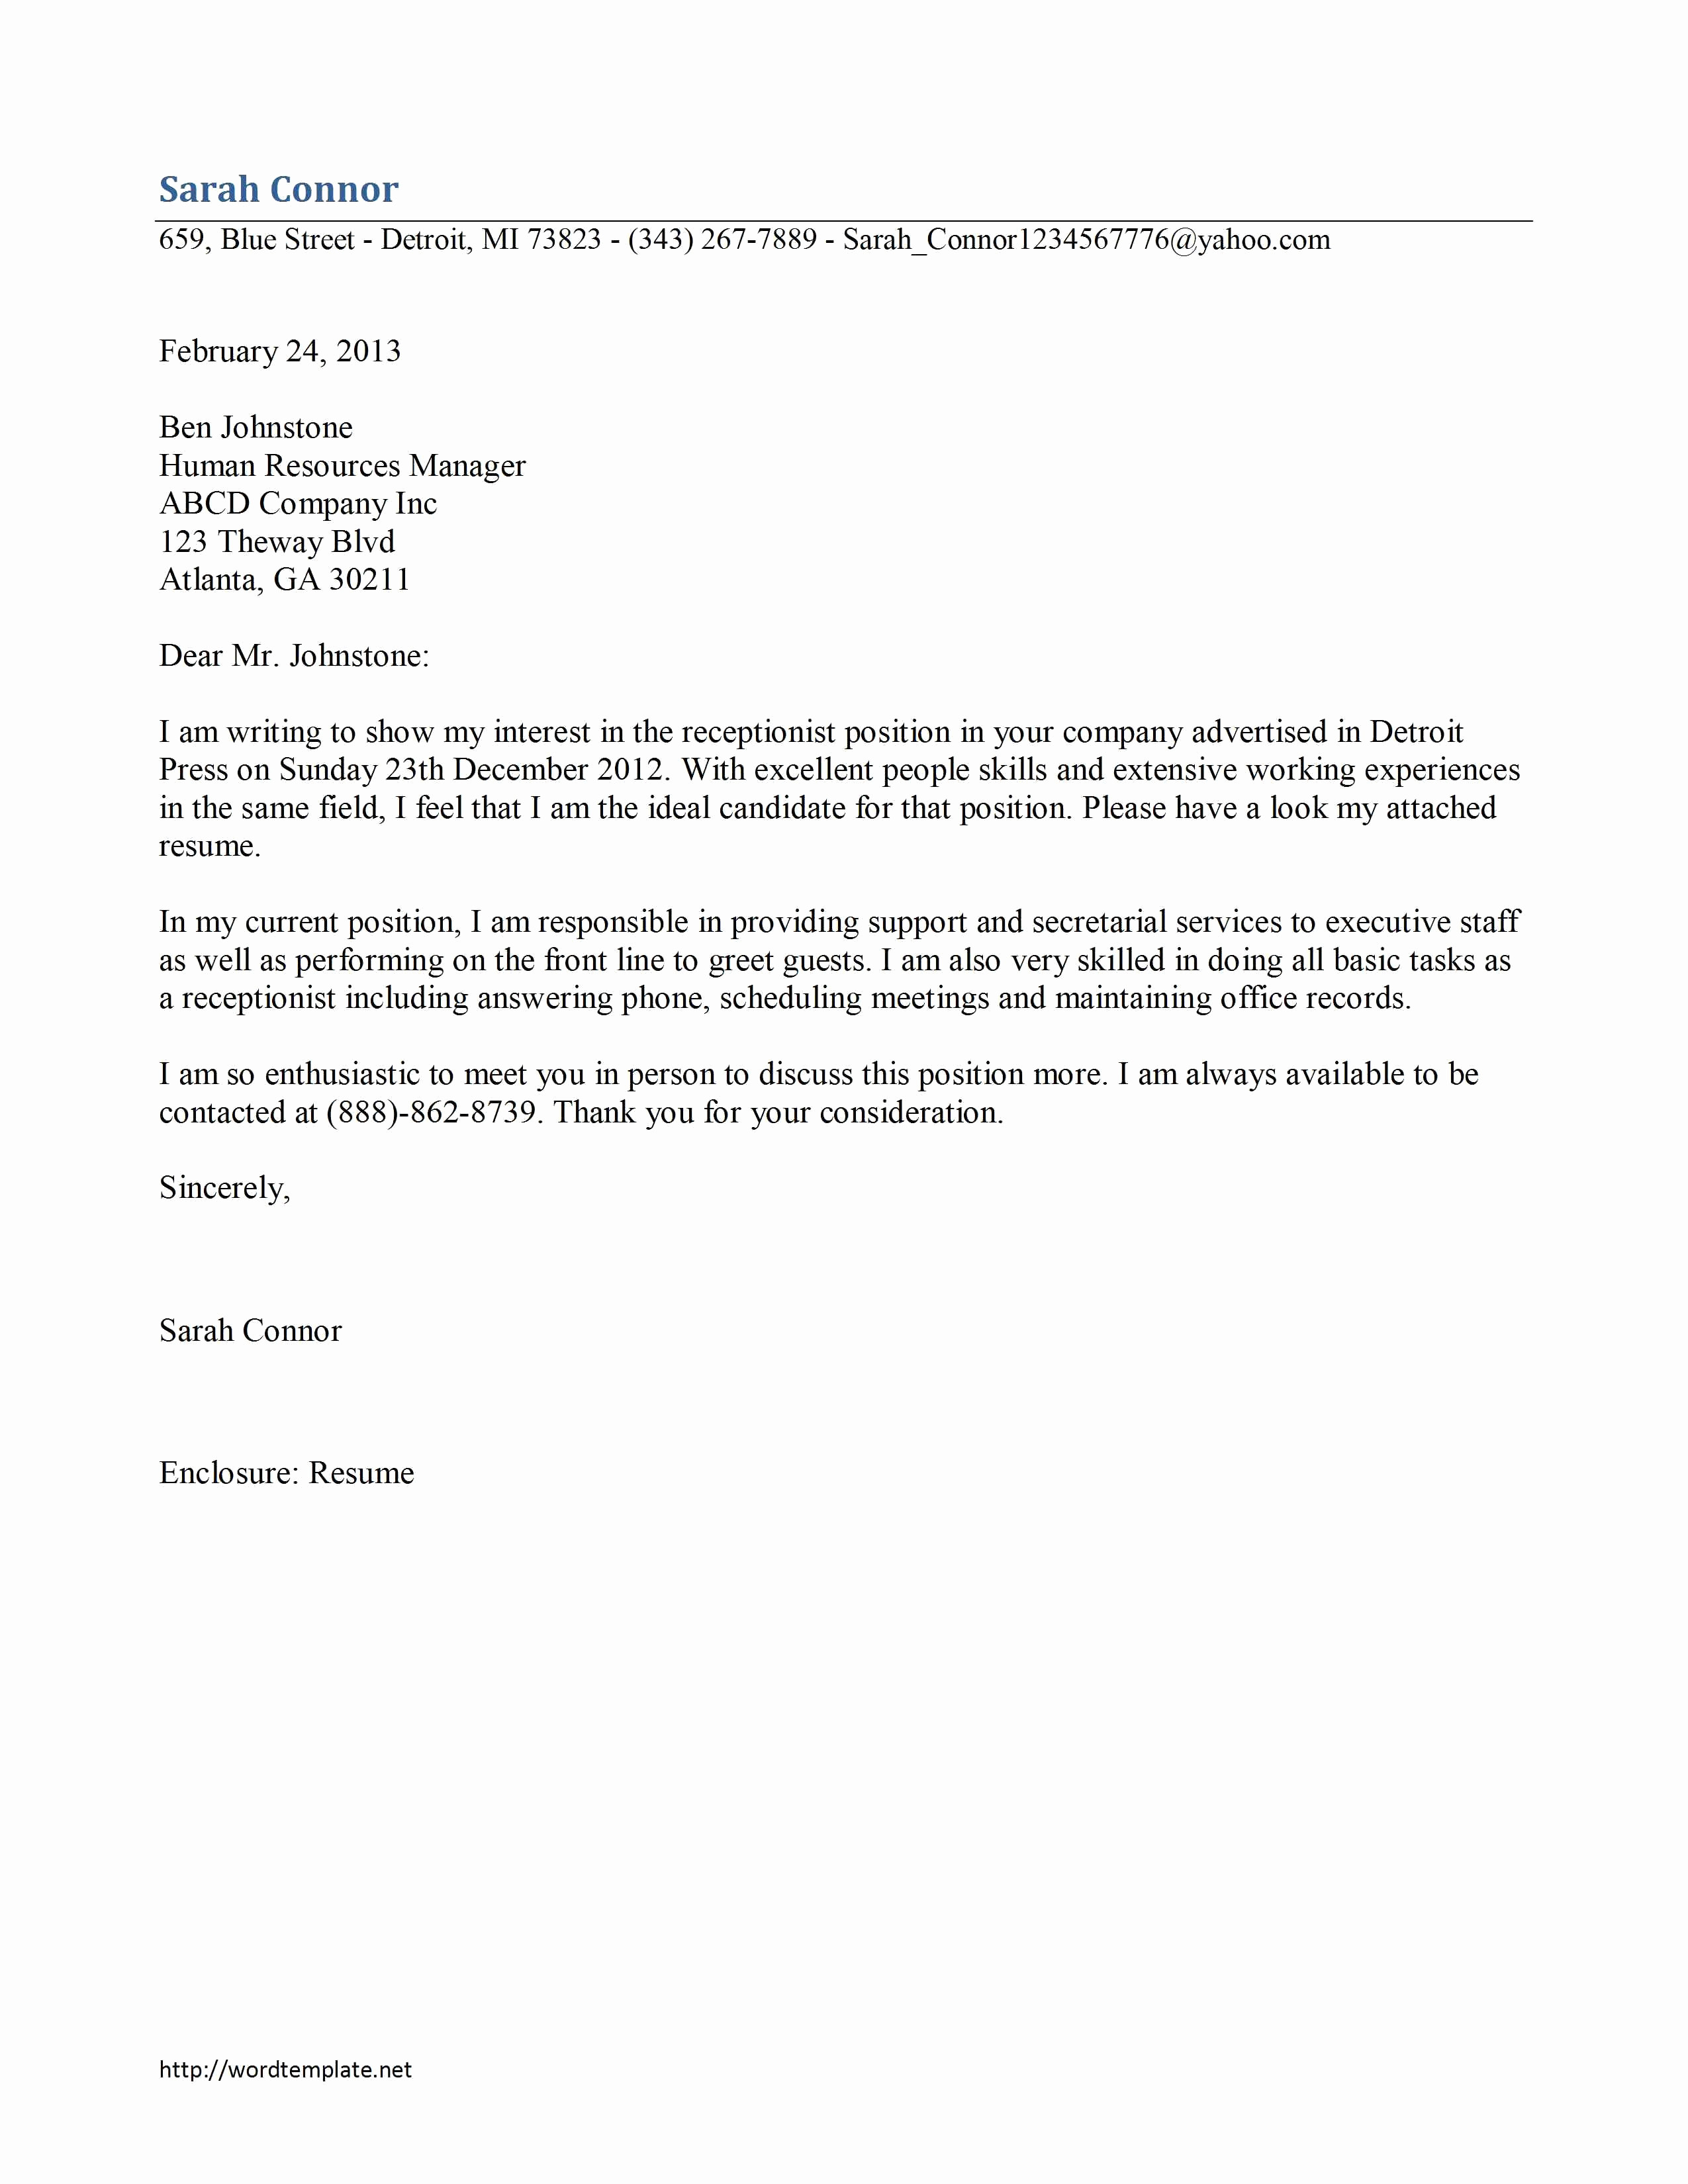 Clerical Cover Letter Template - Sample Cover Letter for Court Clerk Position Personalinjurylovete